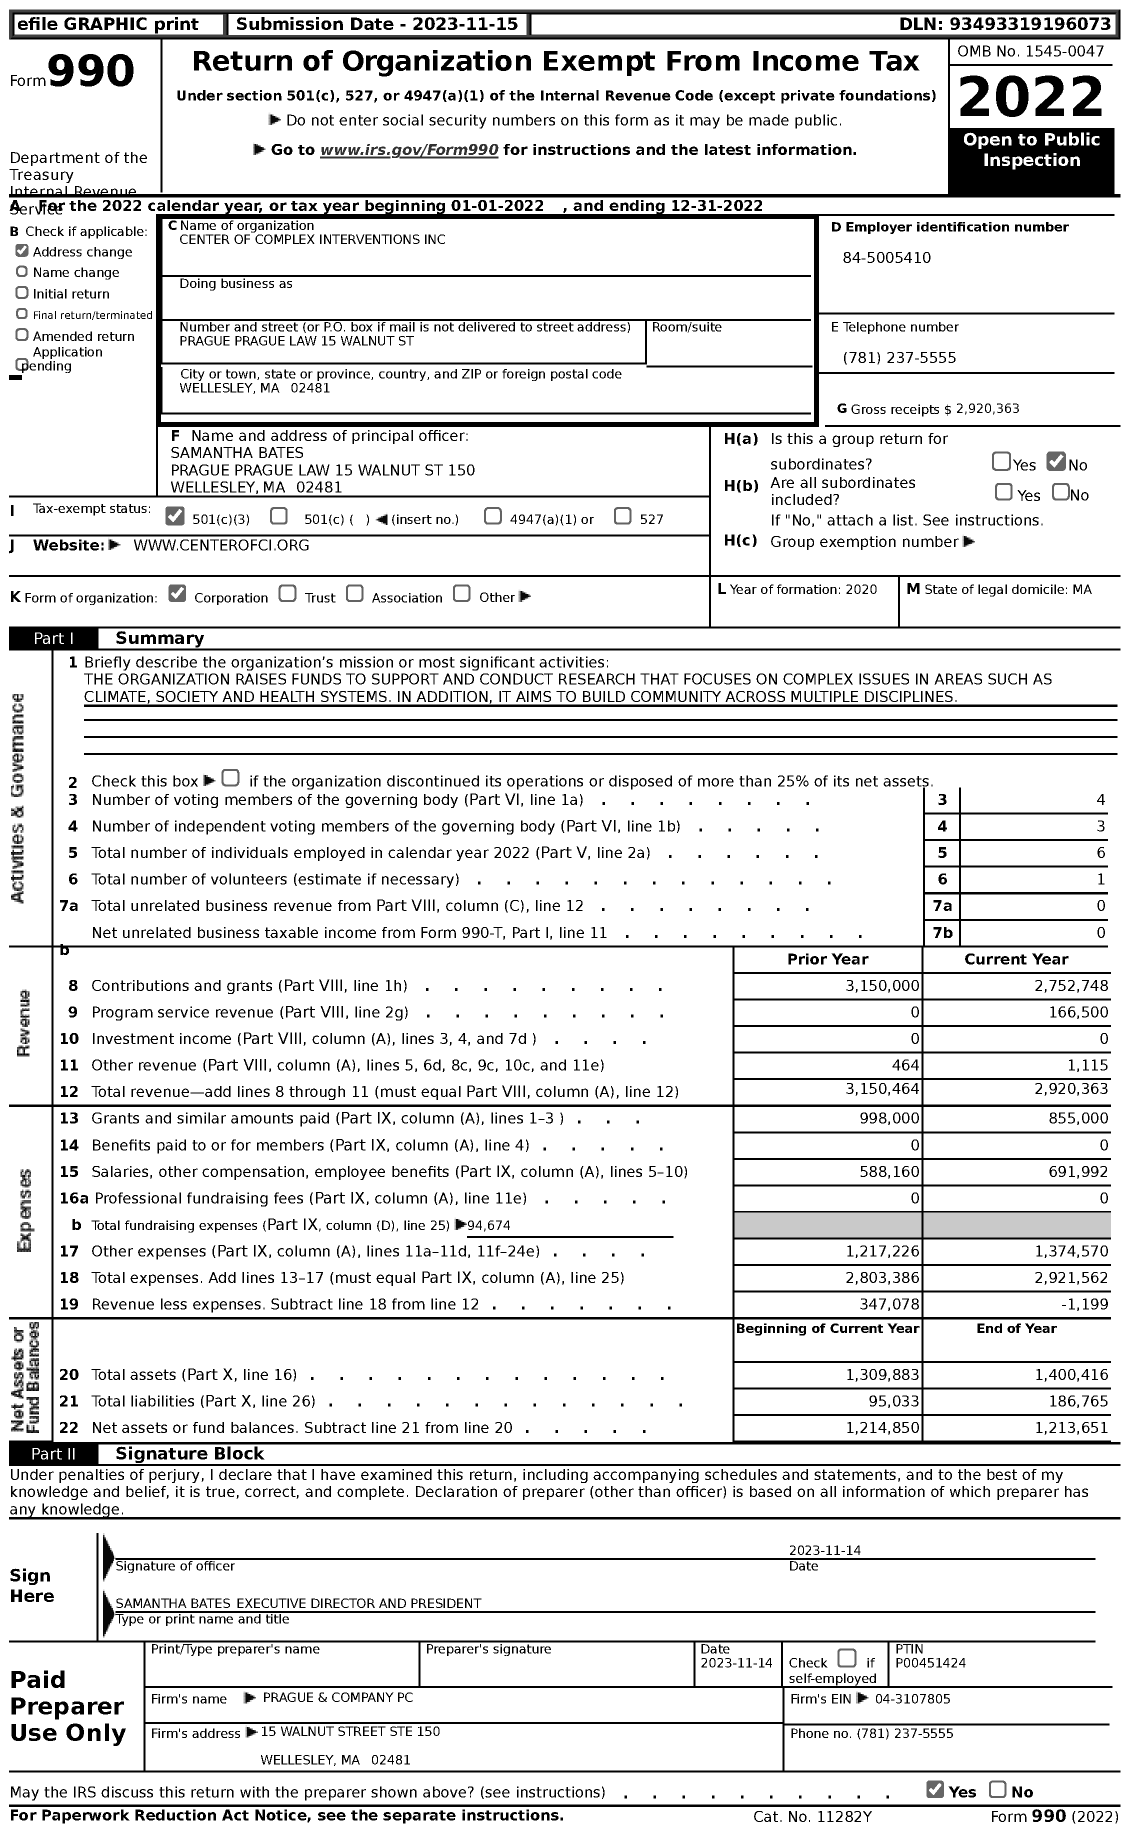 Image of first page of 2022 Form 990 for Center of Complex Interventions